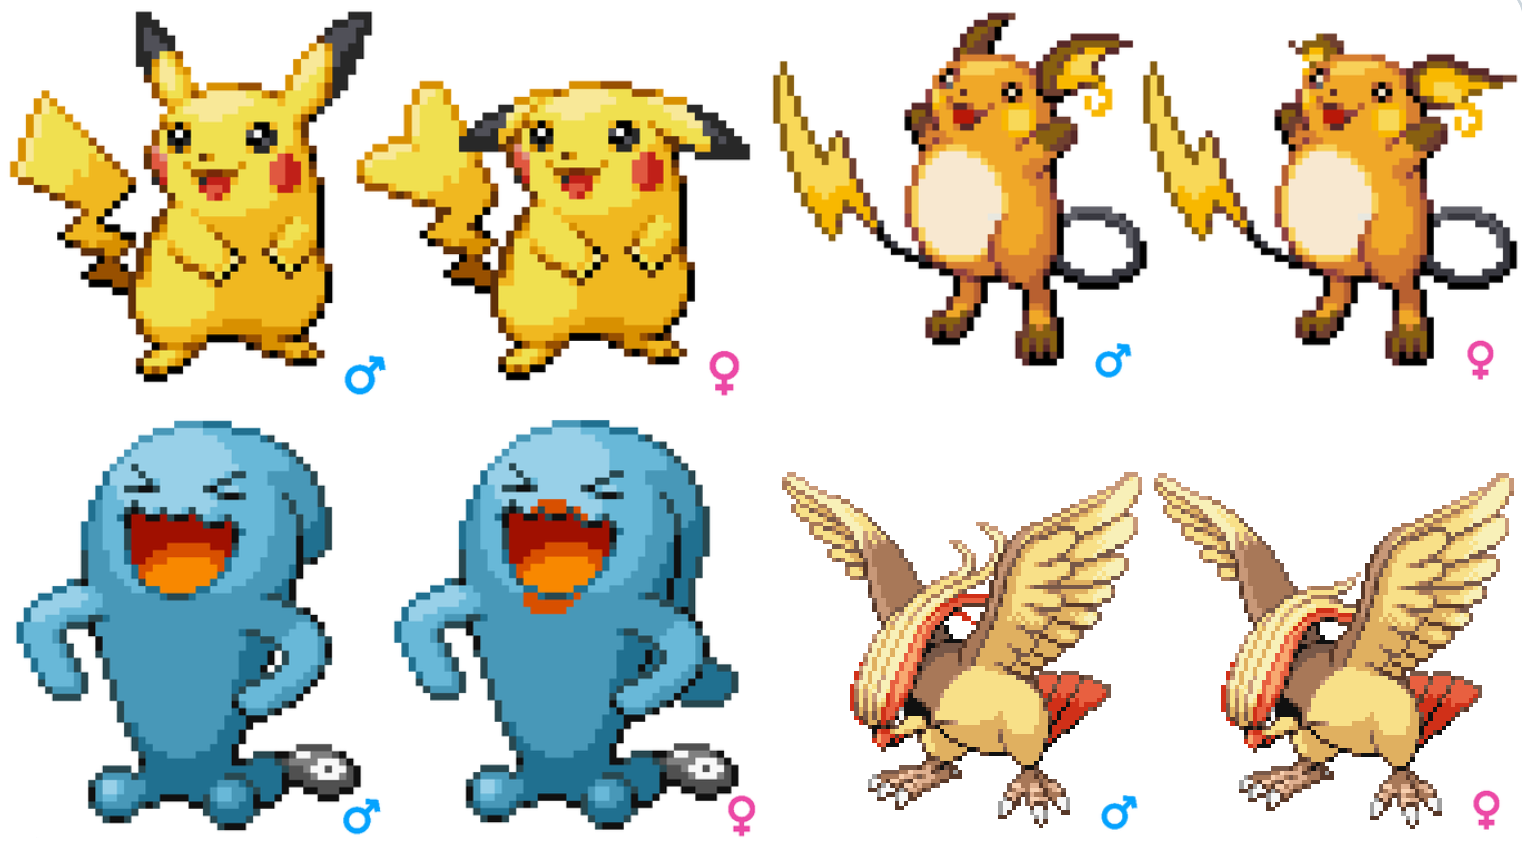 Dr. Lava on X: Yellow Sprites: Out of the whole series, Pokemon